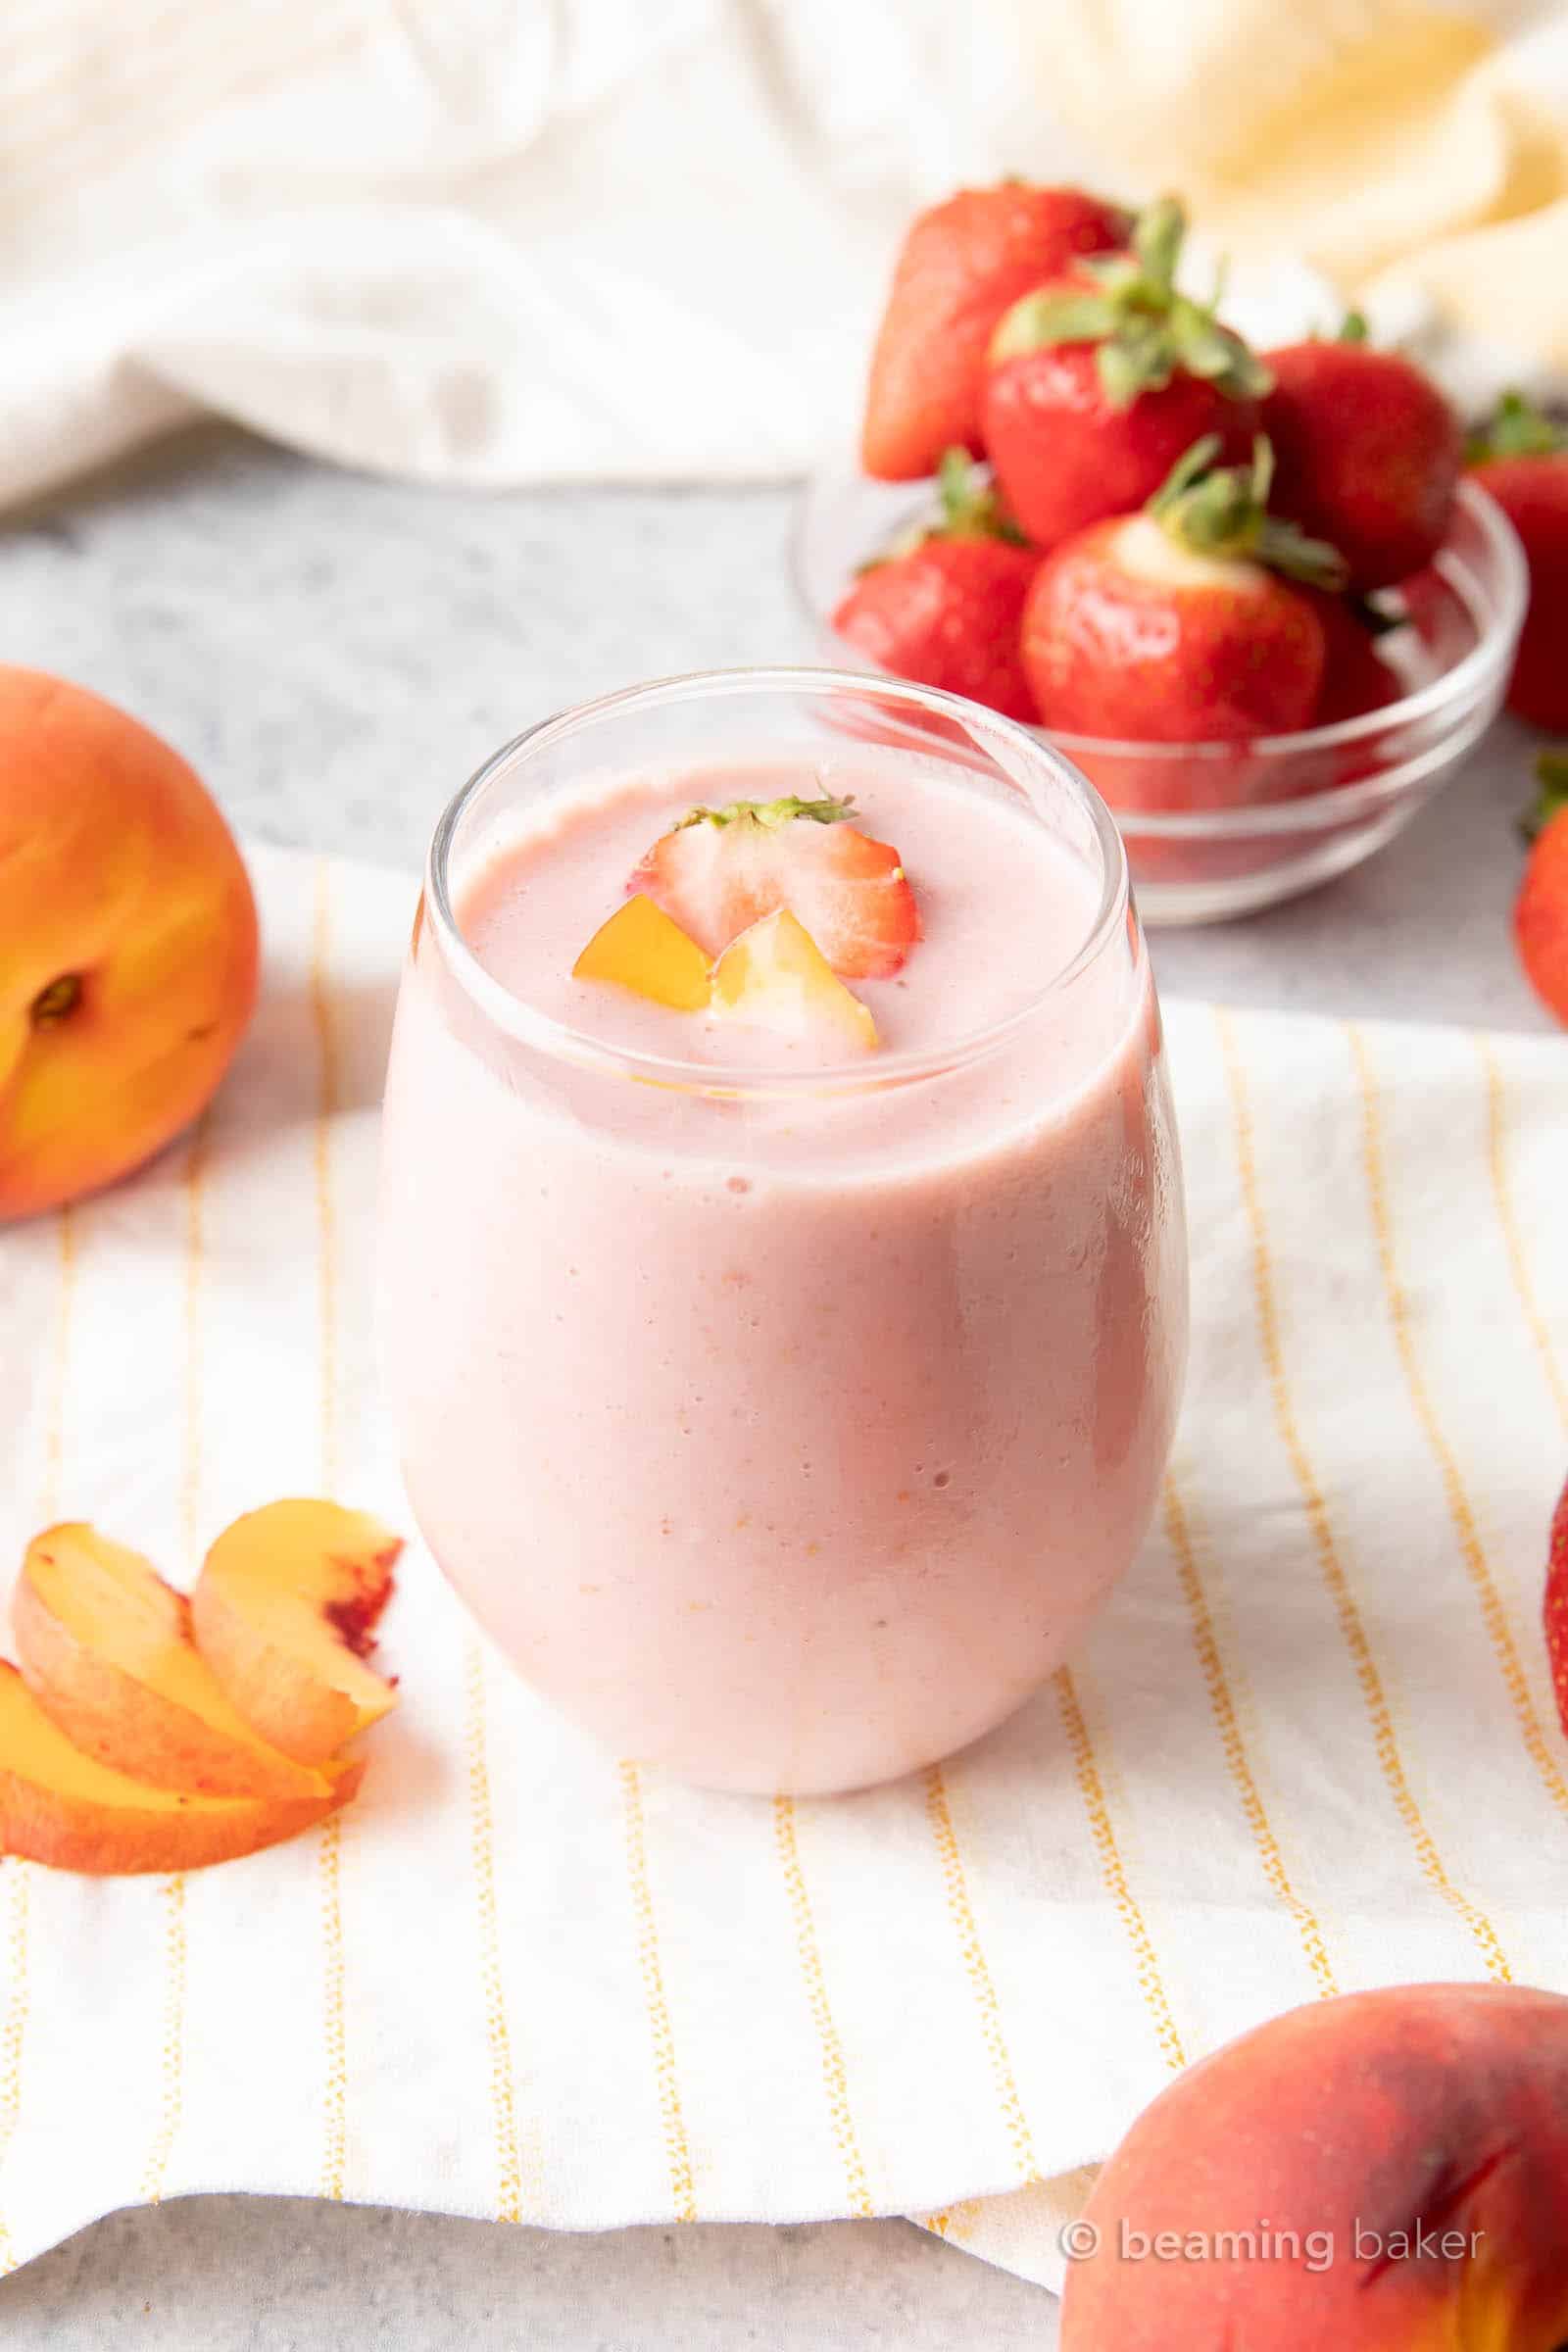 Good ‘n Healthy Smoothie Recipes!: we’ve gathered all of our favorite healthy smoothie recipes all in one place: from banana smoothies to strawberry smoothies ‘n more. Check out deliciously good smoothie recipes! #Smoothie #Smoothies #Recipe #Healthy | Recipes at BeamingBaker.com